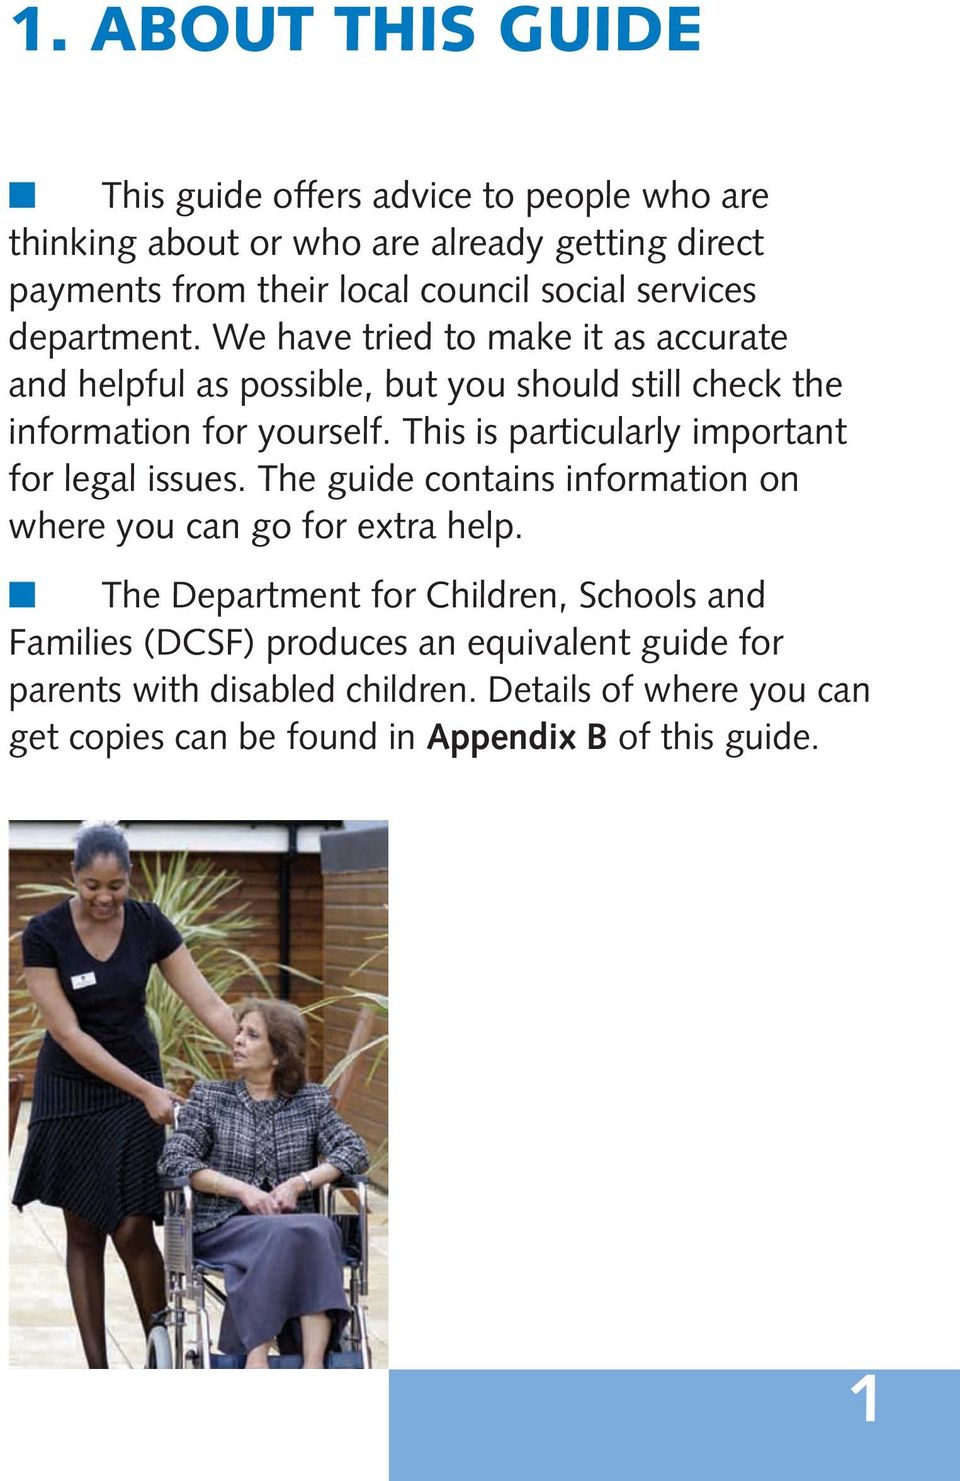 This is particularly important for legal issues. The guide contains information on where you can go for extra help.